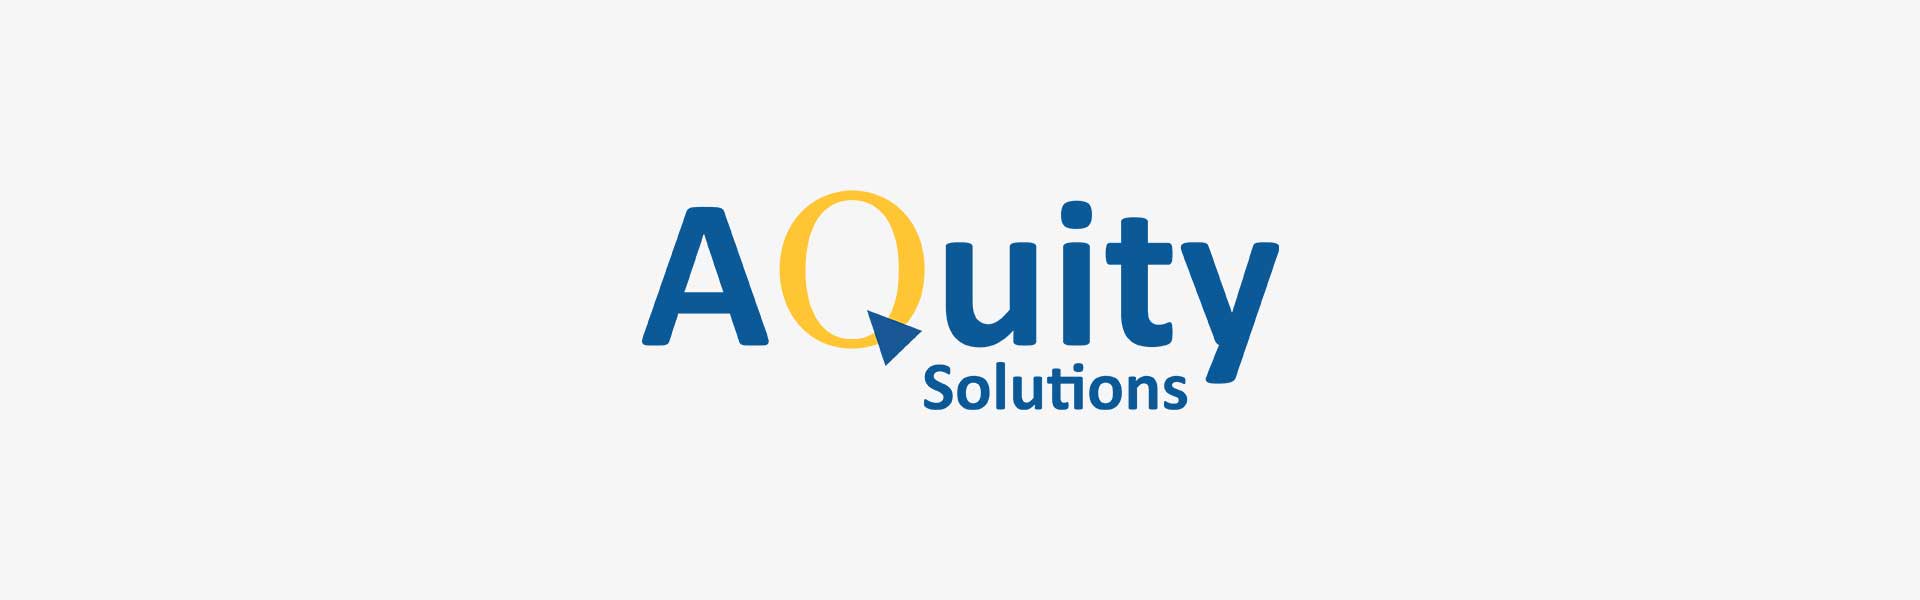 Aquity Solutions Press Release